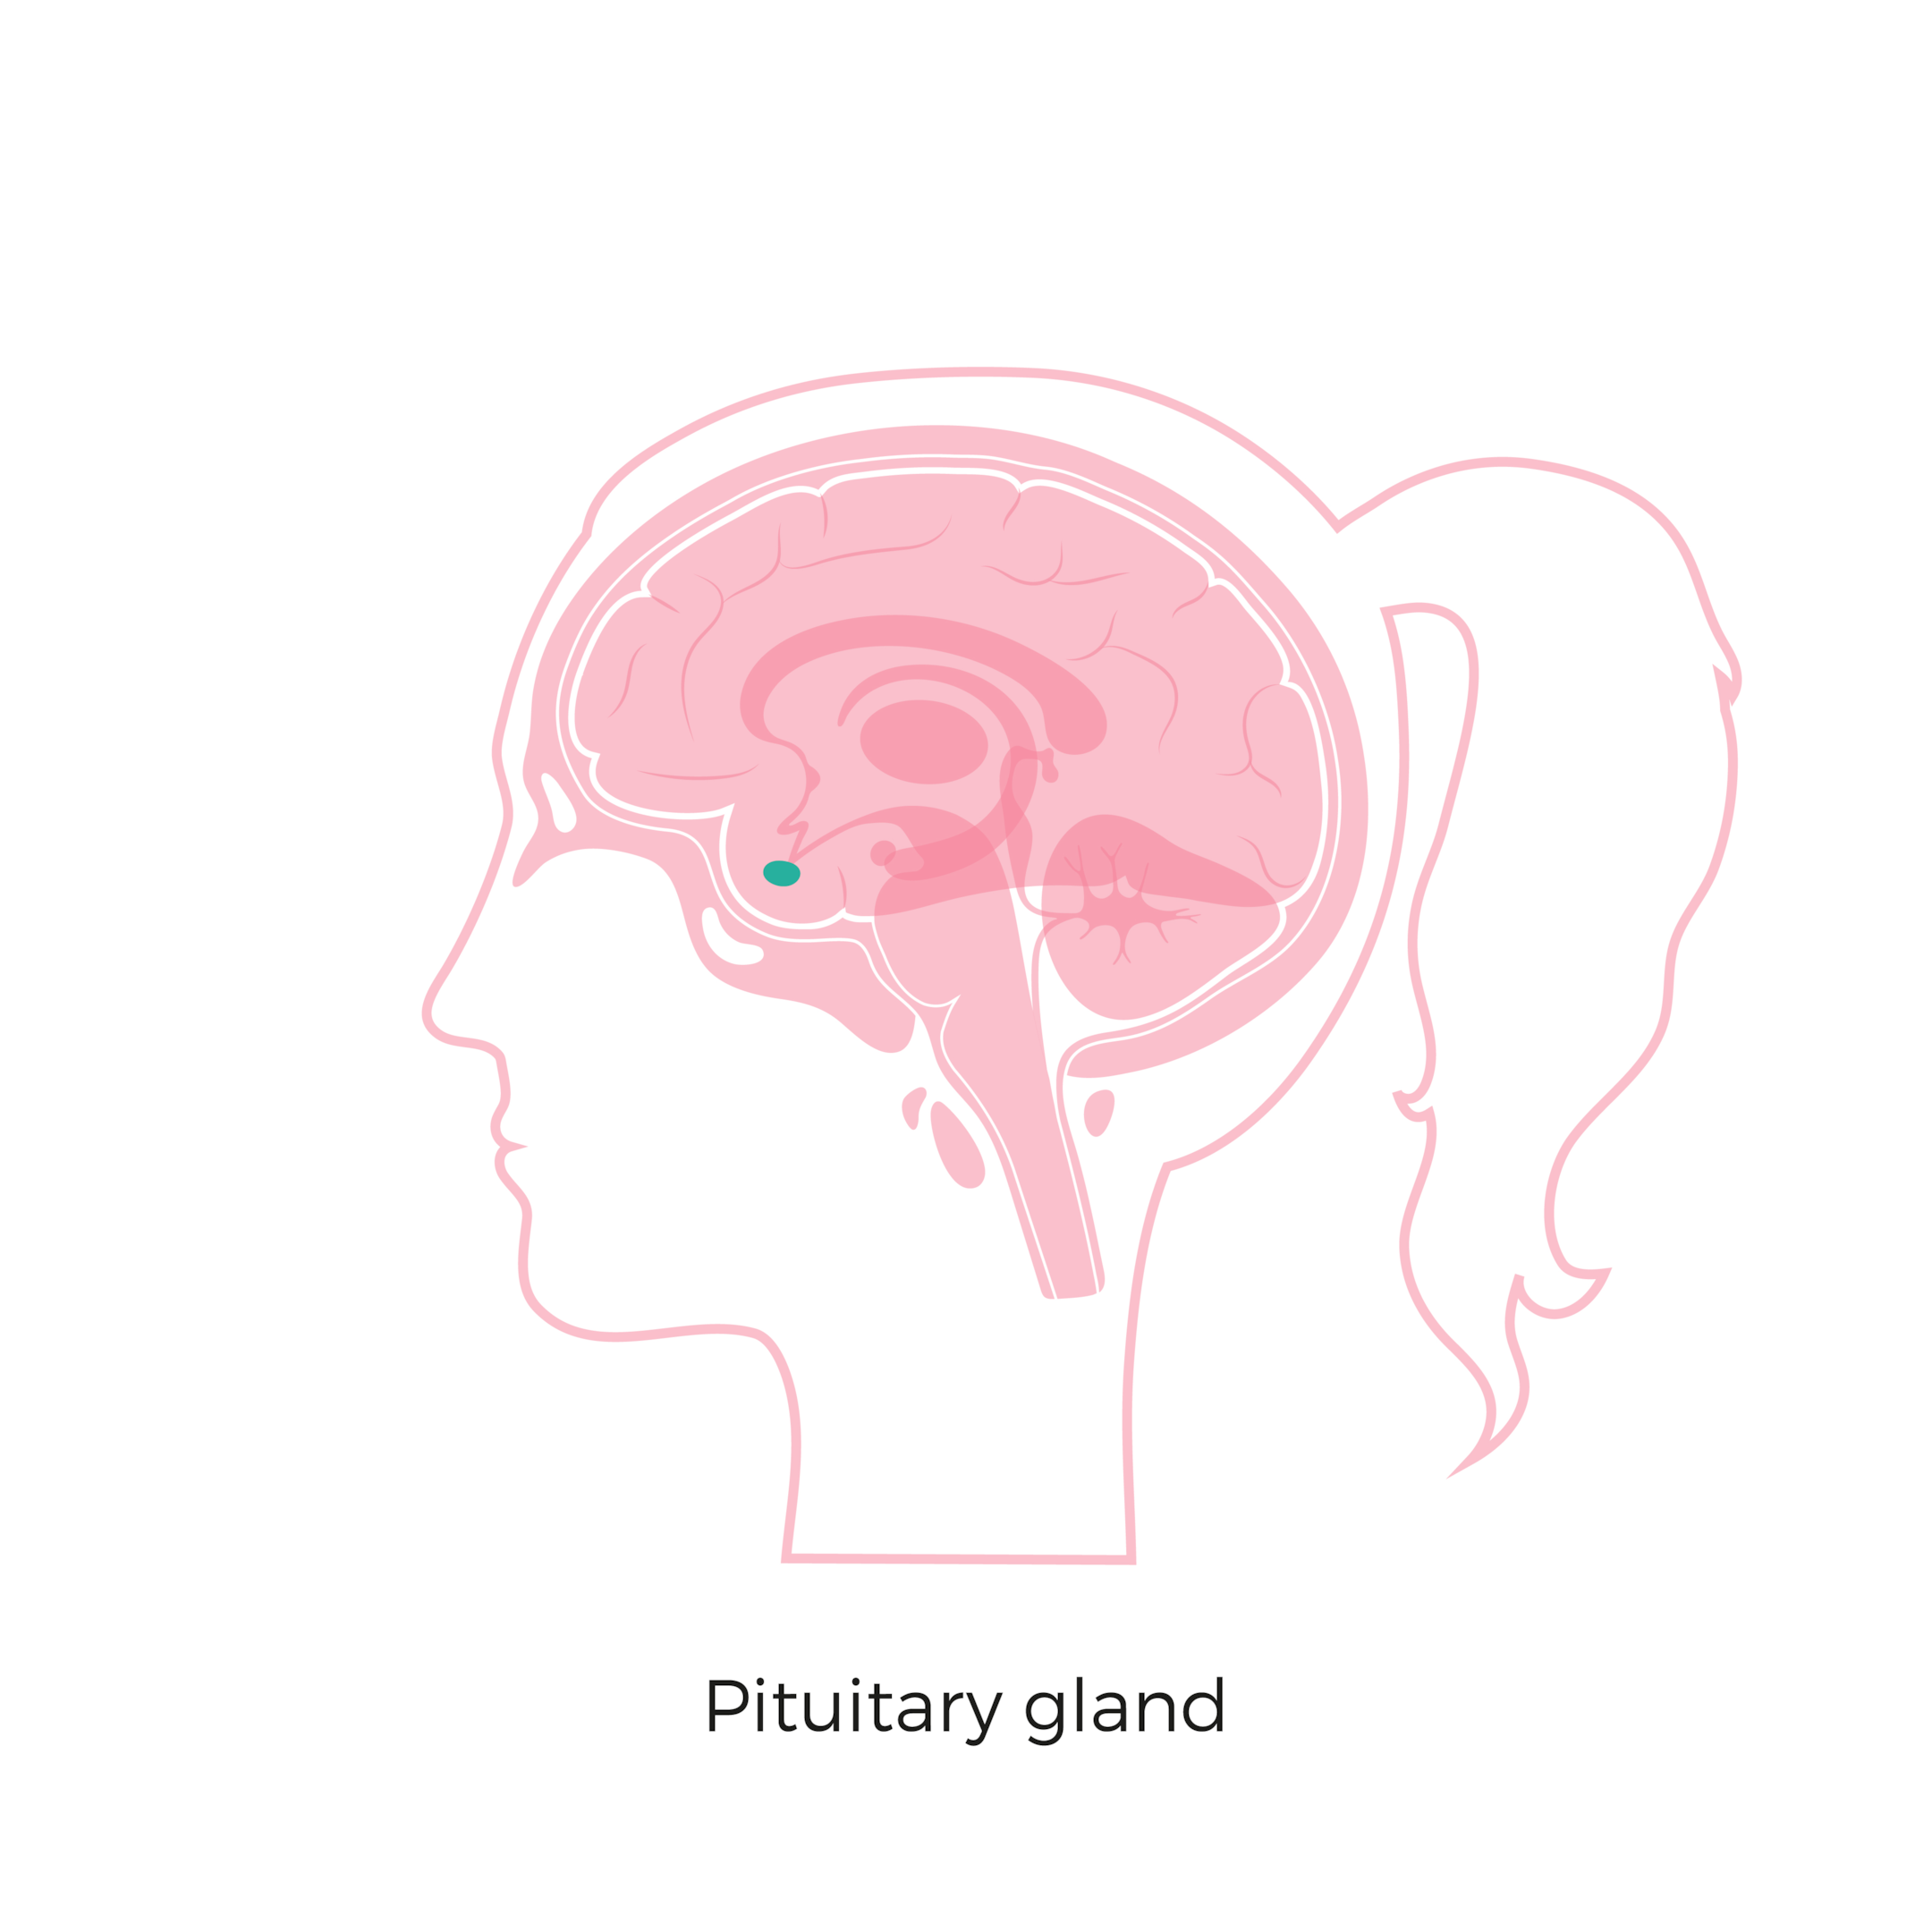 what causes pituitary tumors and how do pituitary gland tumors affect prolactin production 